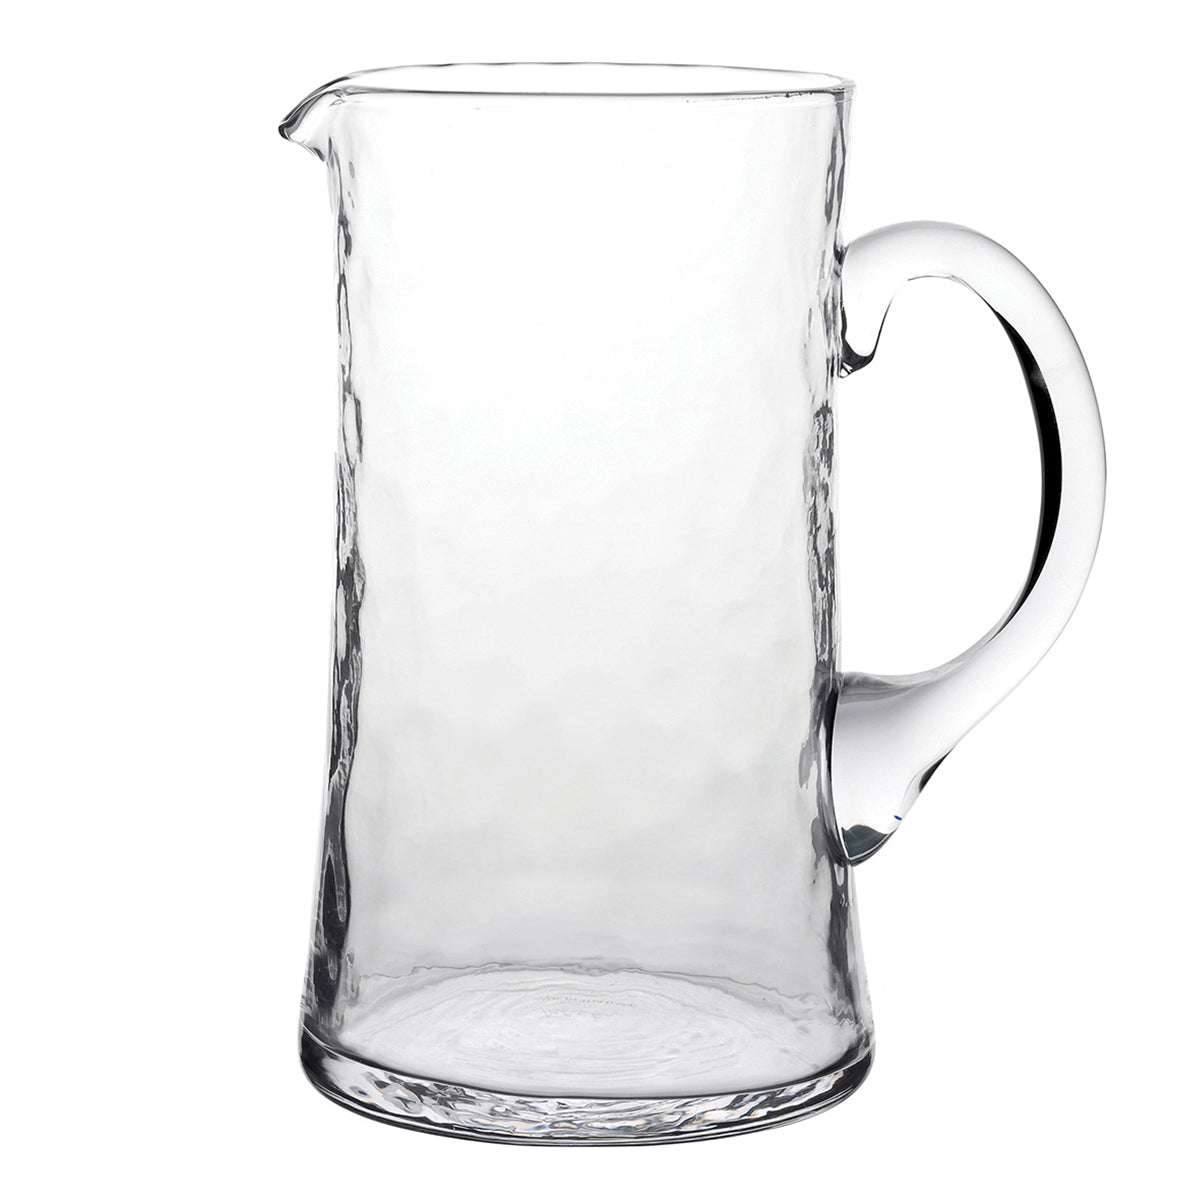 A pitcher perfect for batch cocktails, mocktails or your favorite morning juice, this textural mouth-blown glass features a subtle shimmer.